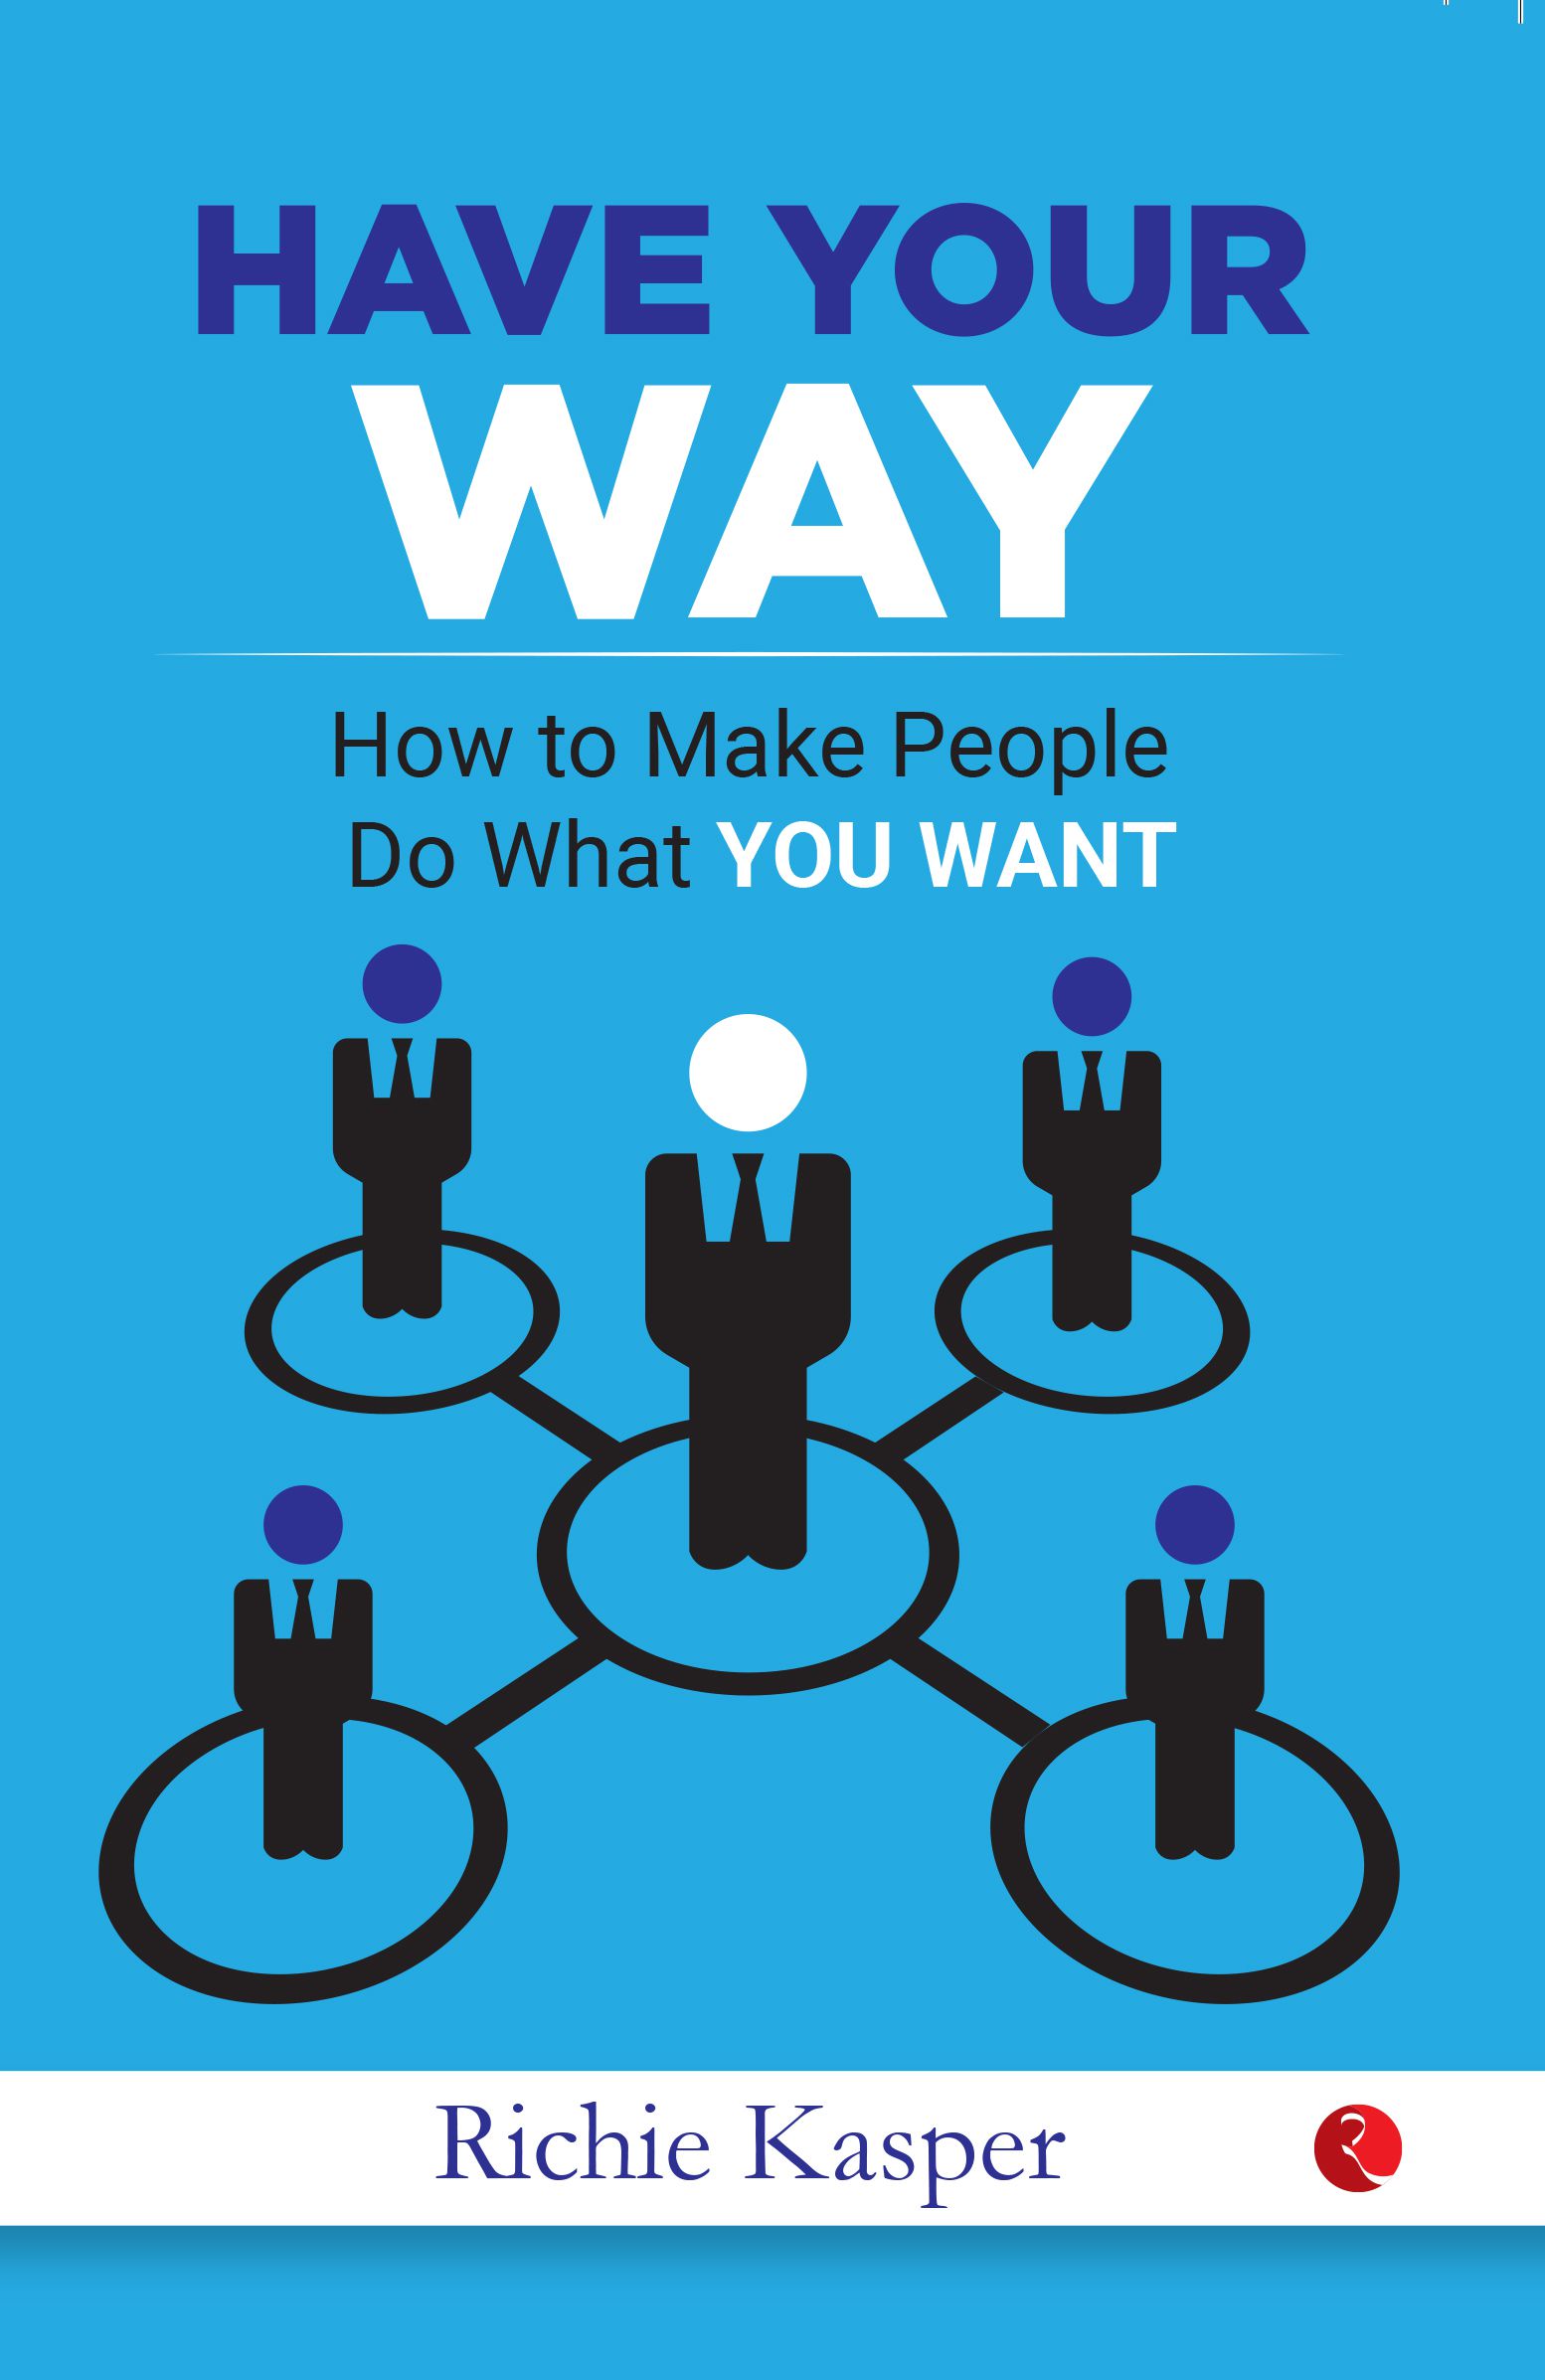     			HAVE YOUR WAY : How to Make People Do What You Want By Richie Kasper